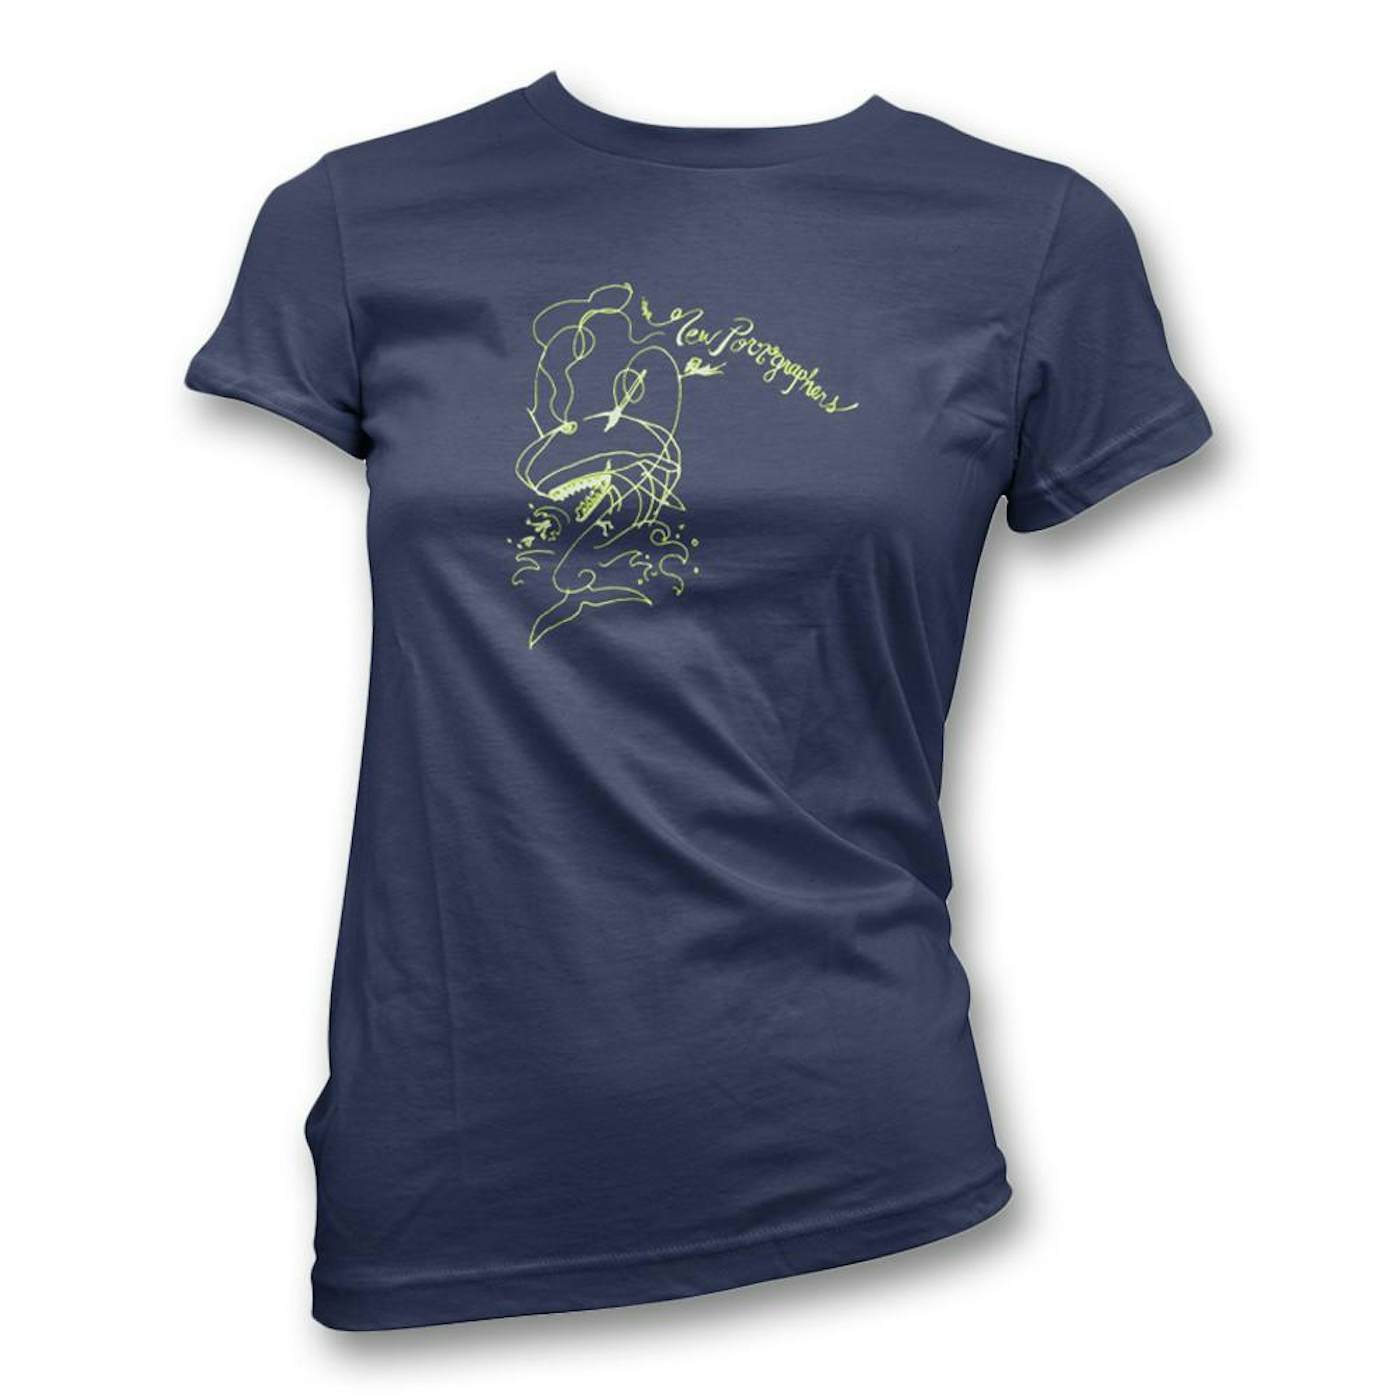 The New Pornographers Whale T-Shirt - Women's